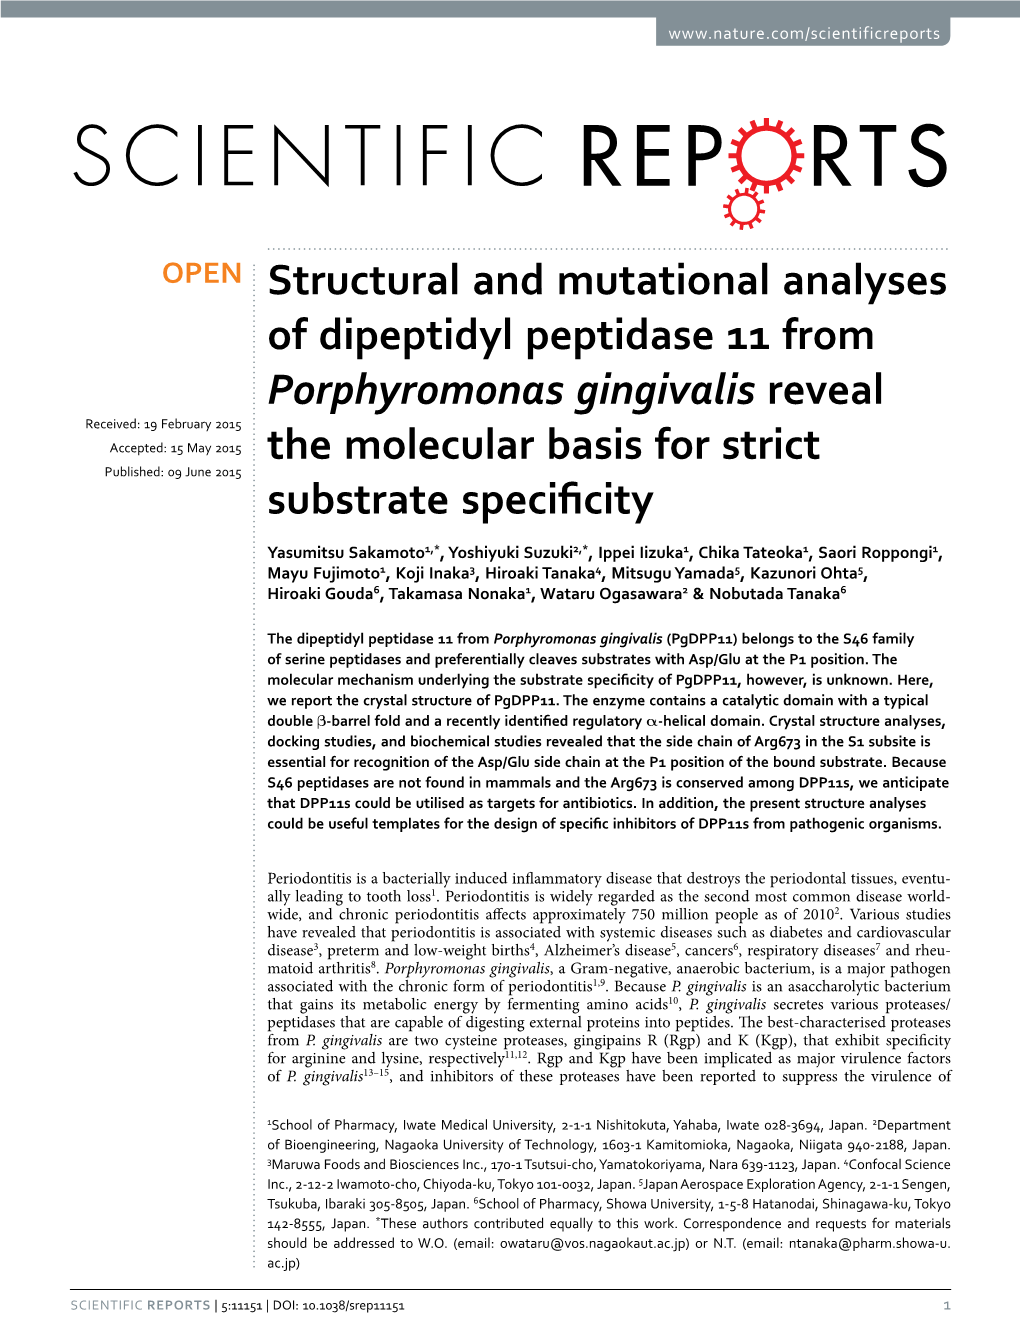 Structural and Mutational Analyses of Dipeptidyl Peptidase 11 from Porphyromonas Gingivalis Reveal the Molecular Basis for Strict Substrate Specificity